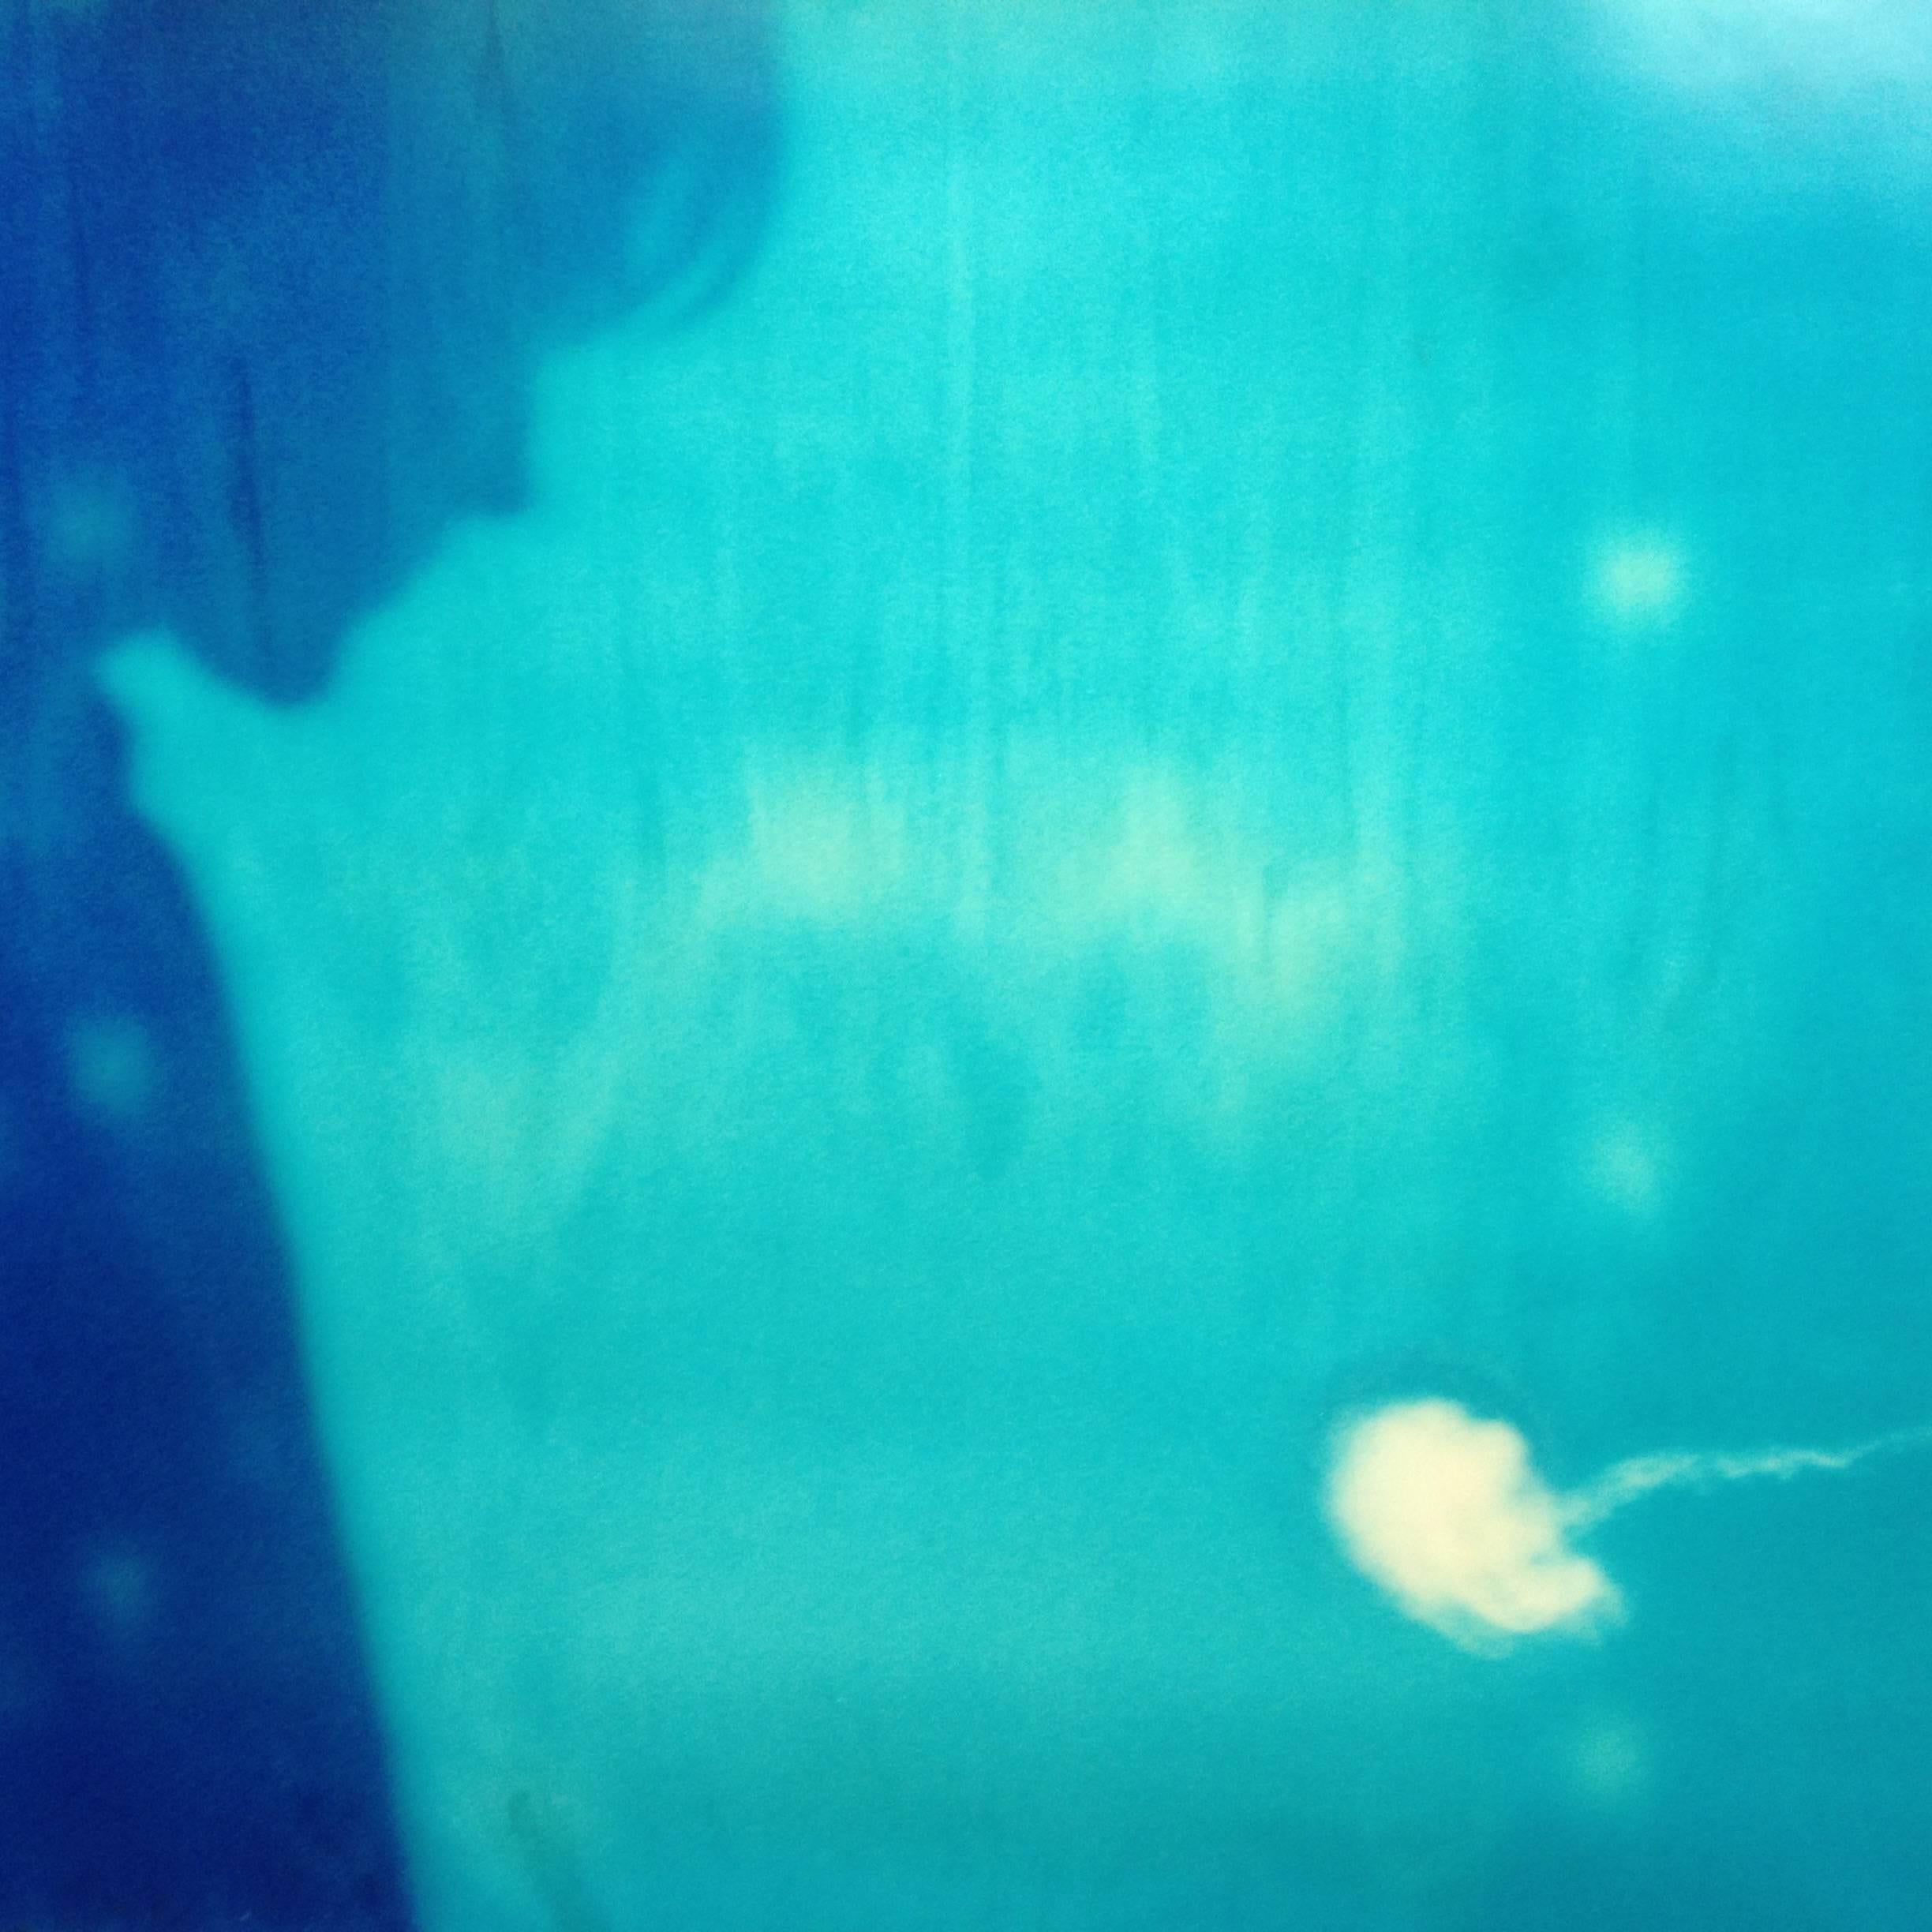 Stefanie Schneider Abstract Photograph - Henry and the Jelly Fish with Ryan Gosling - Contemporary, Polaroid, Abstract